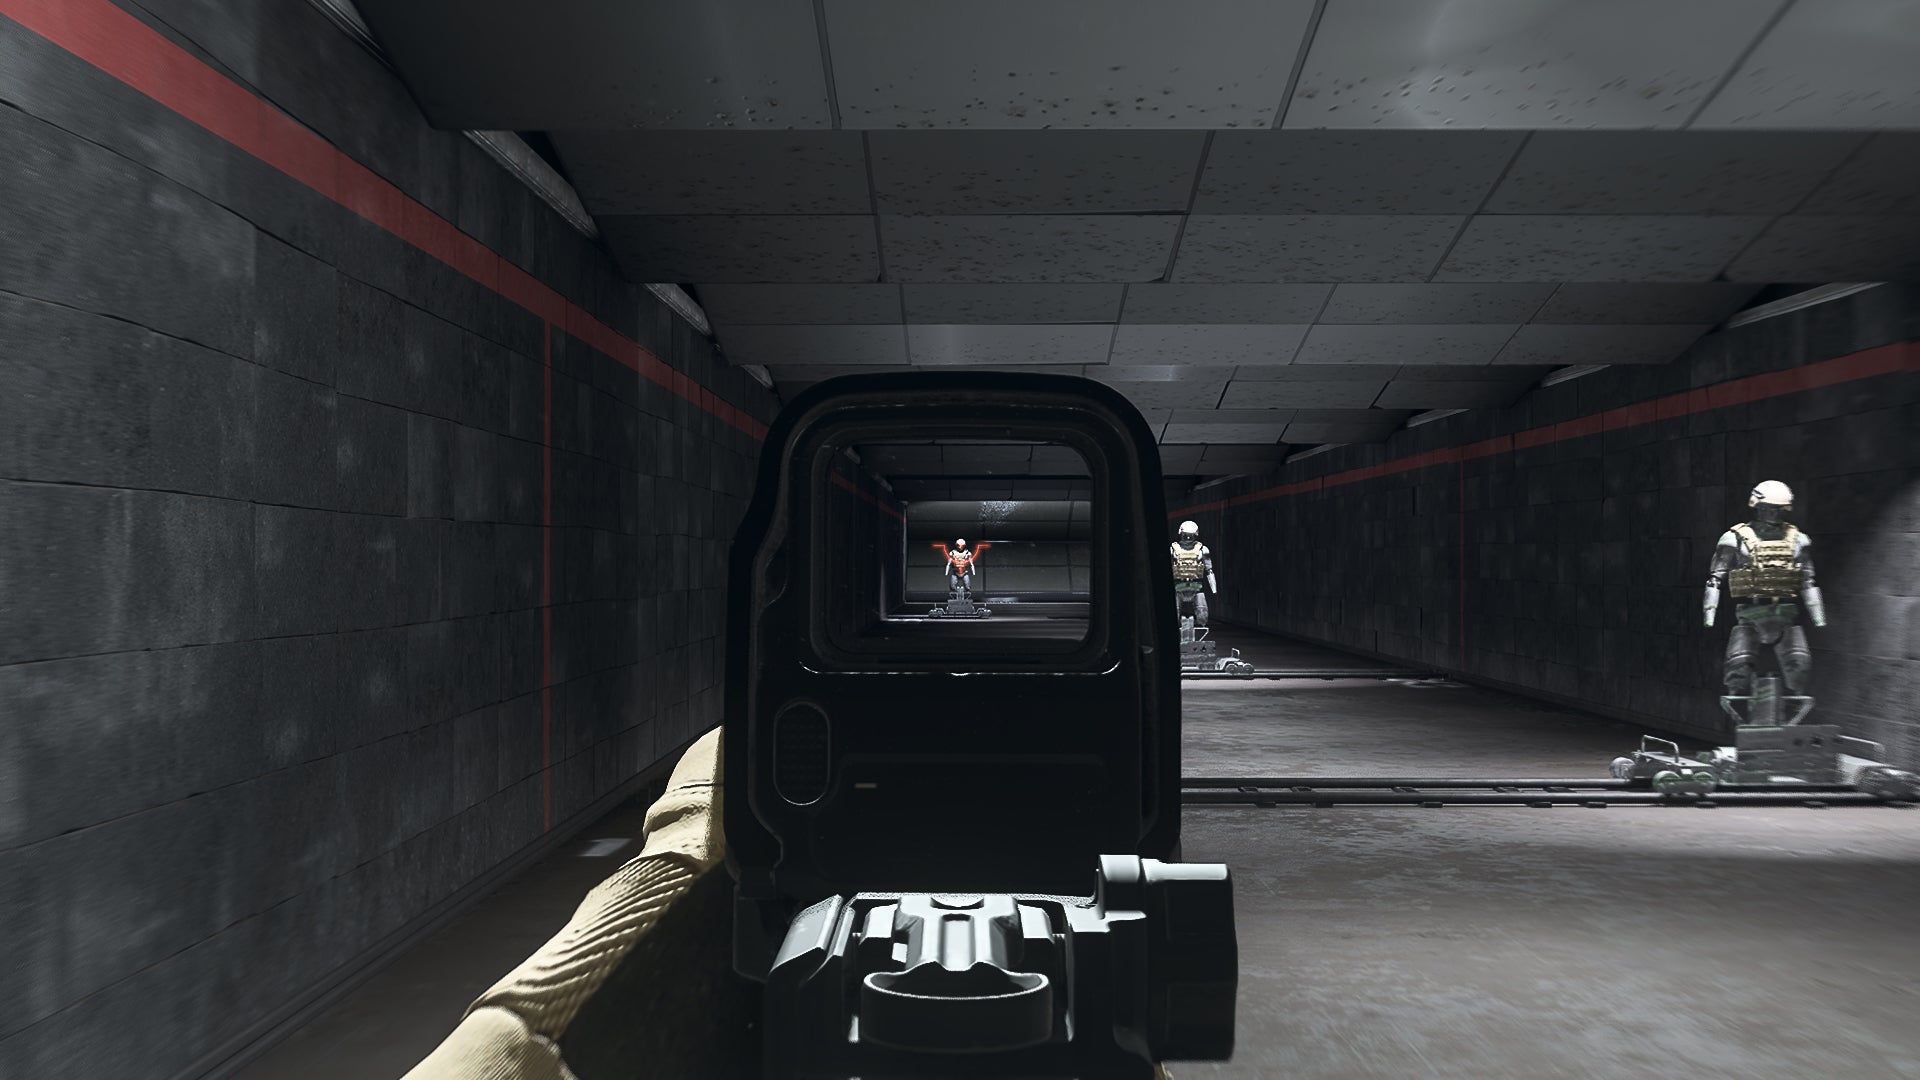 The player in Warzone 2.0 aims at a training dummy using the SZ Lonewolf Optic optic attachment.